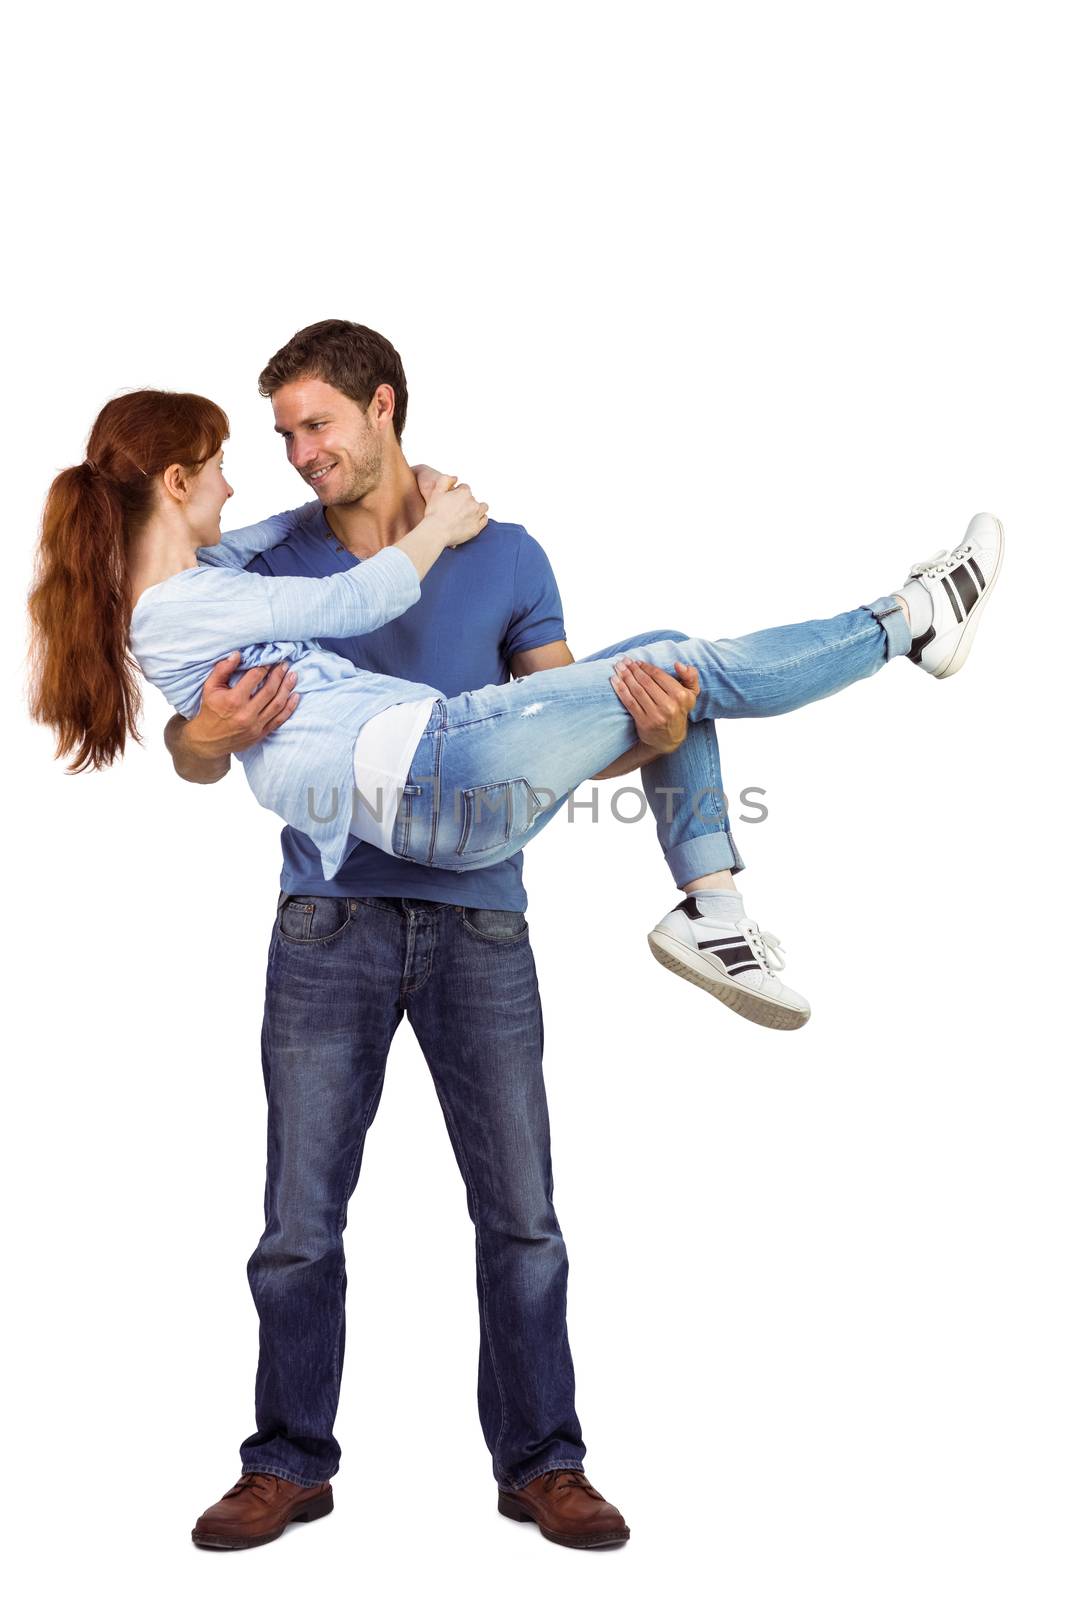 Man lifting up his girlfriend on white background